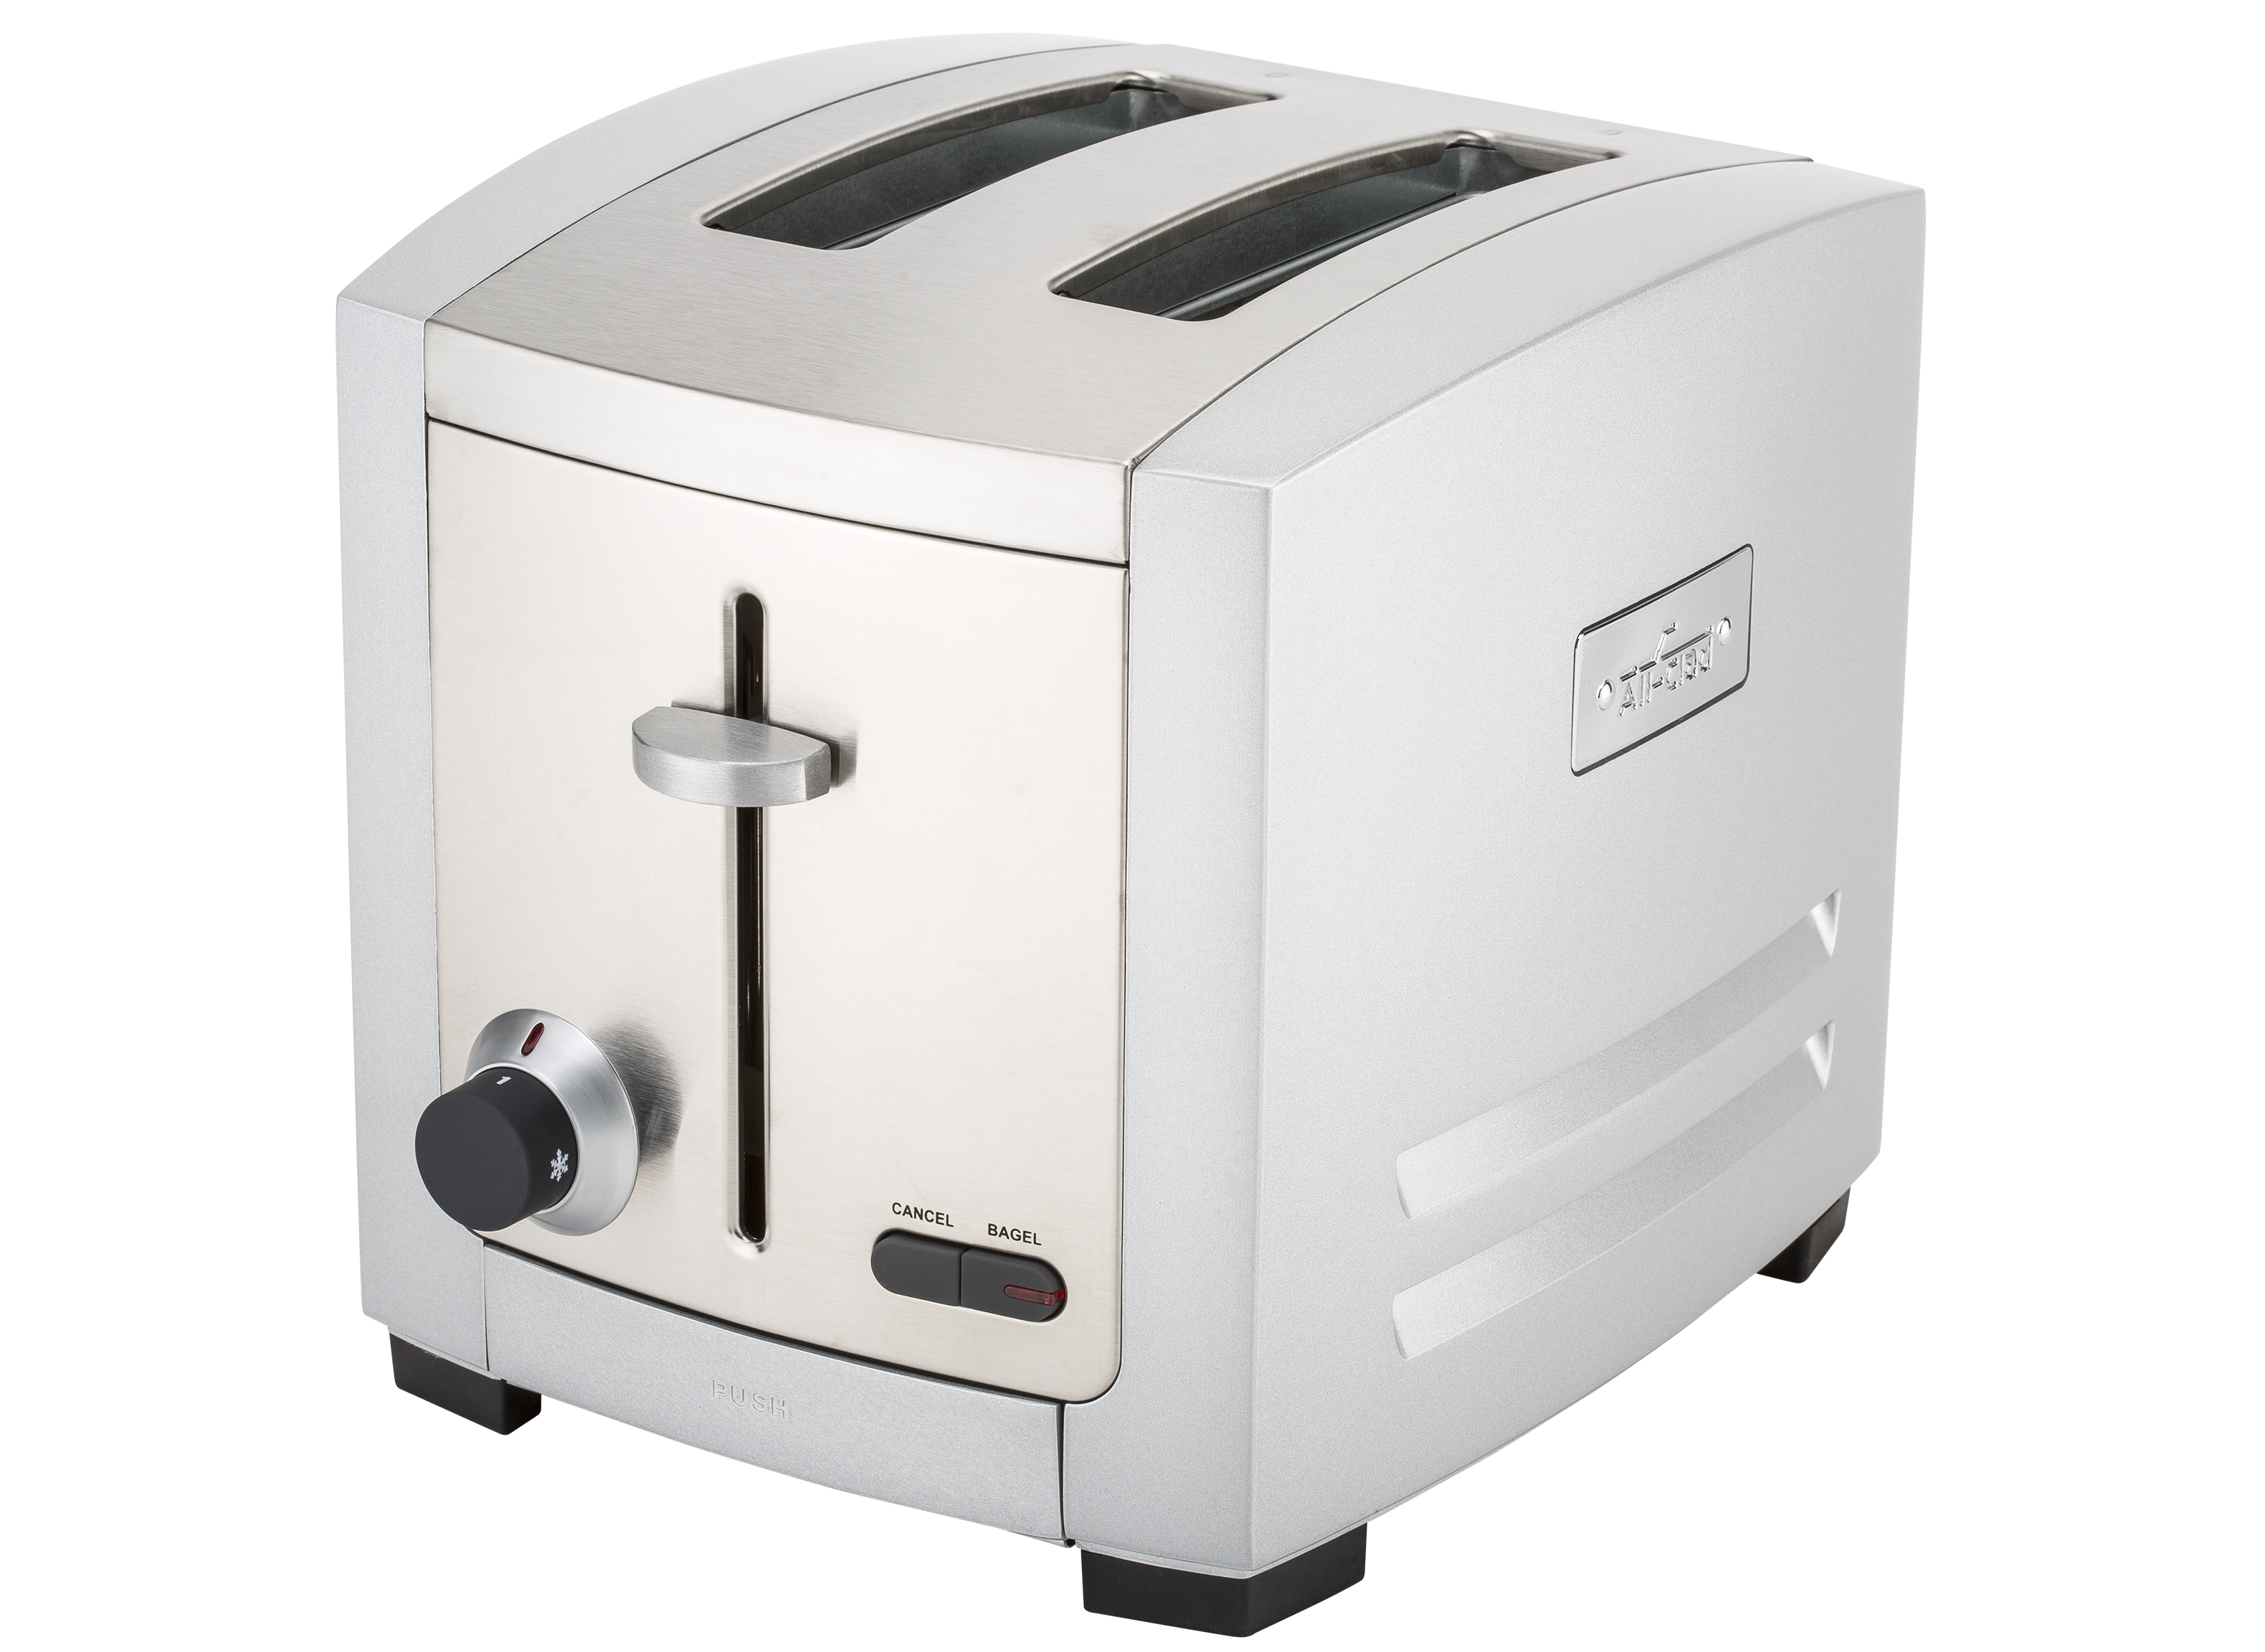 https://crdms.images.consumerreports.org/prod/products/cr/models/389607-toasters-allclad-2slicetj802d.png